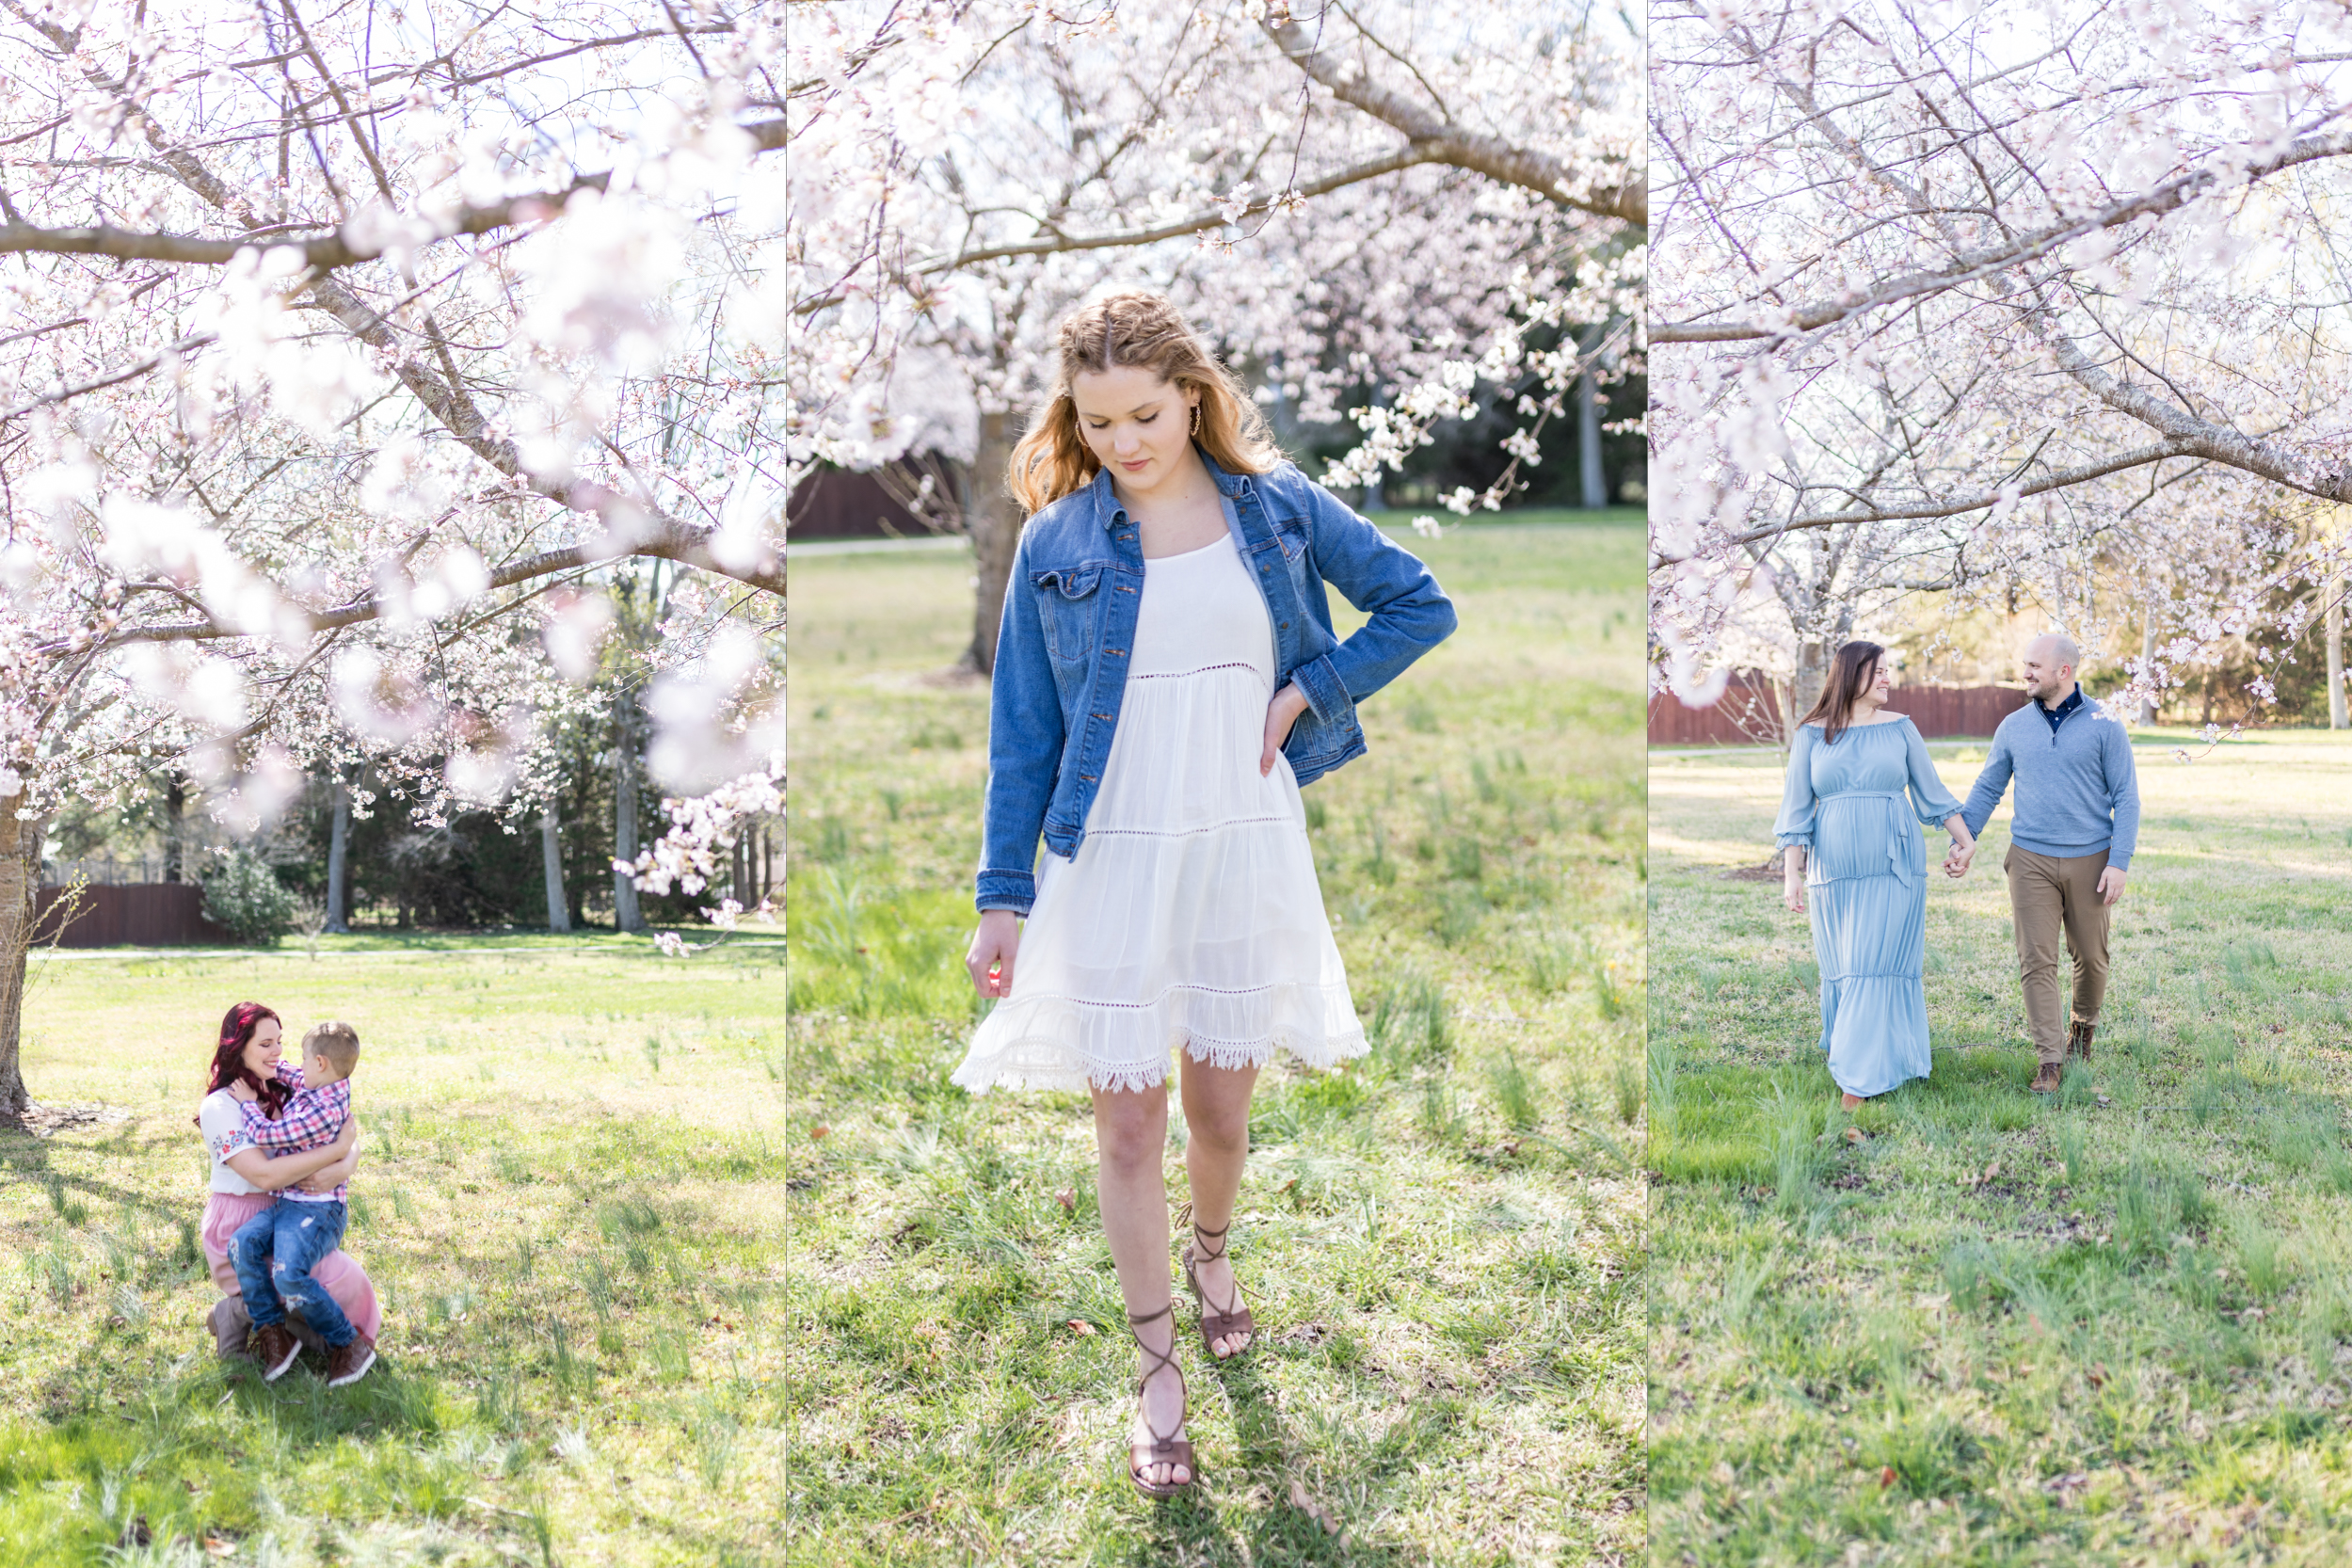 What to wear for cherry blossom photos